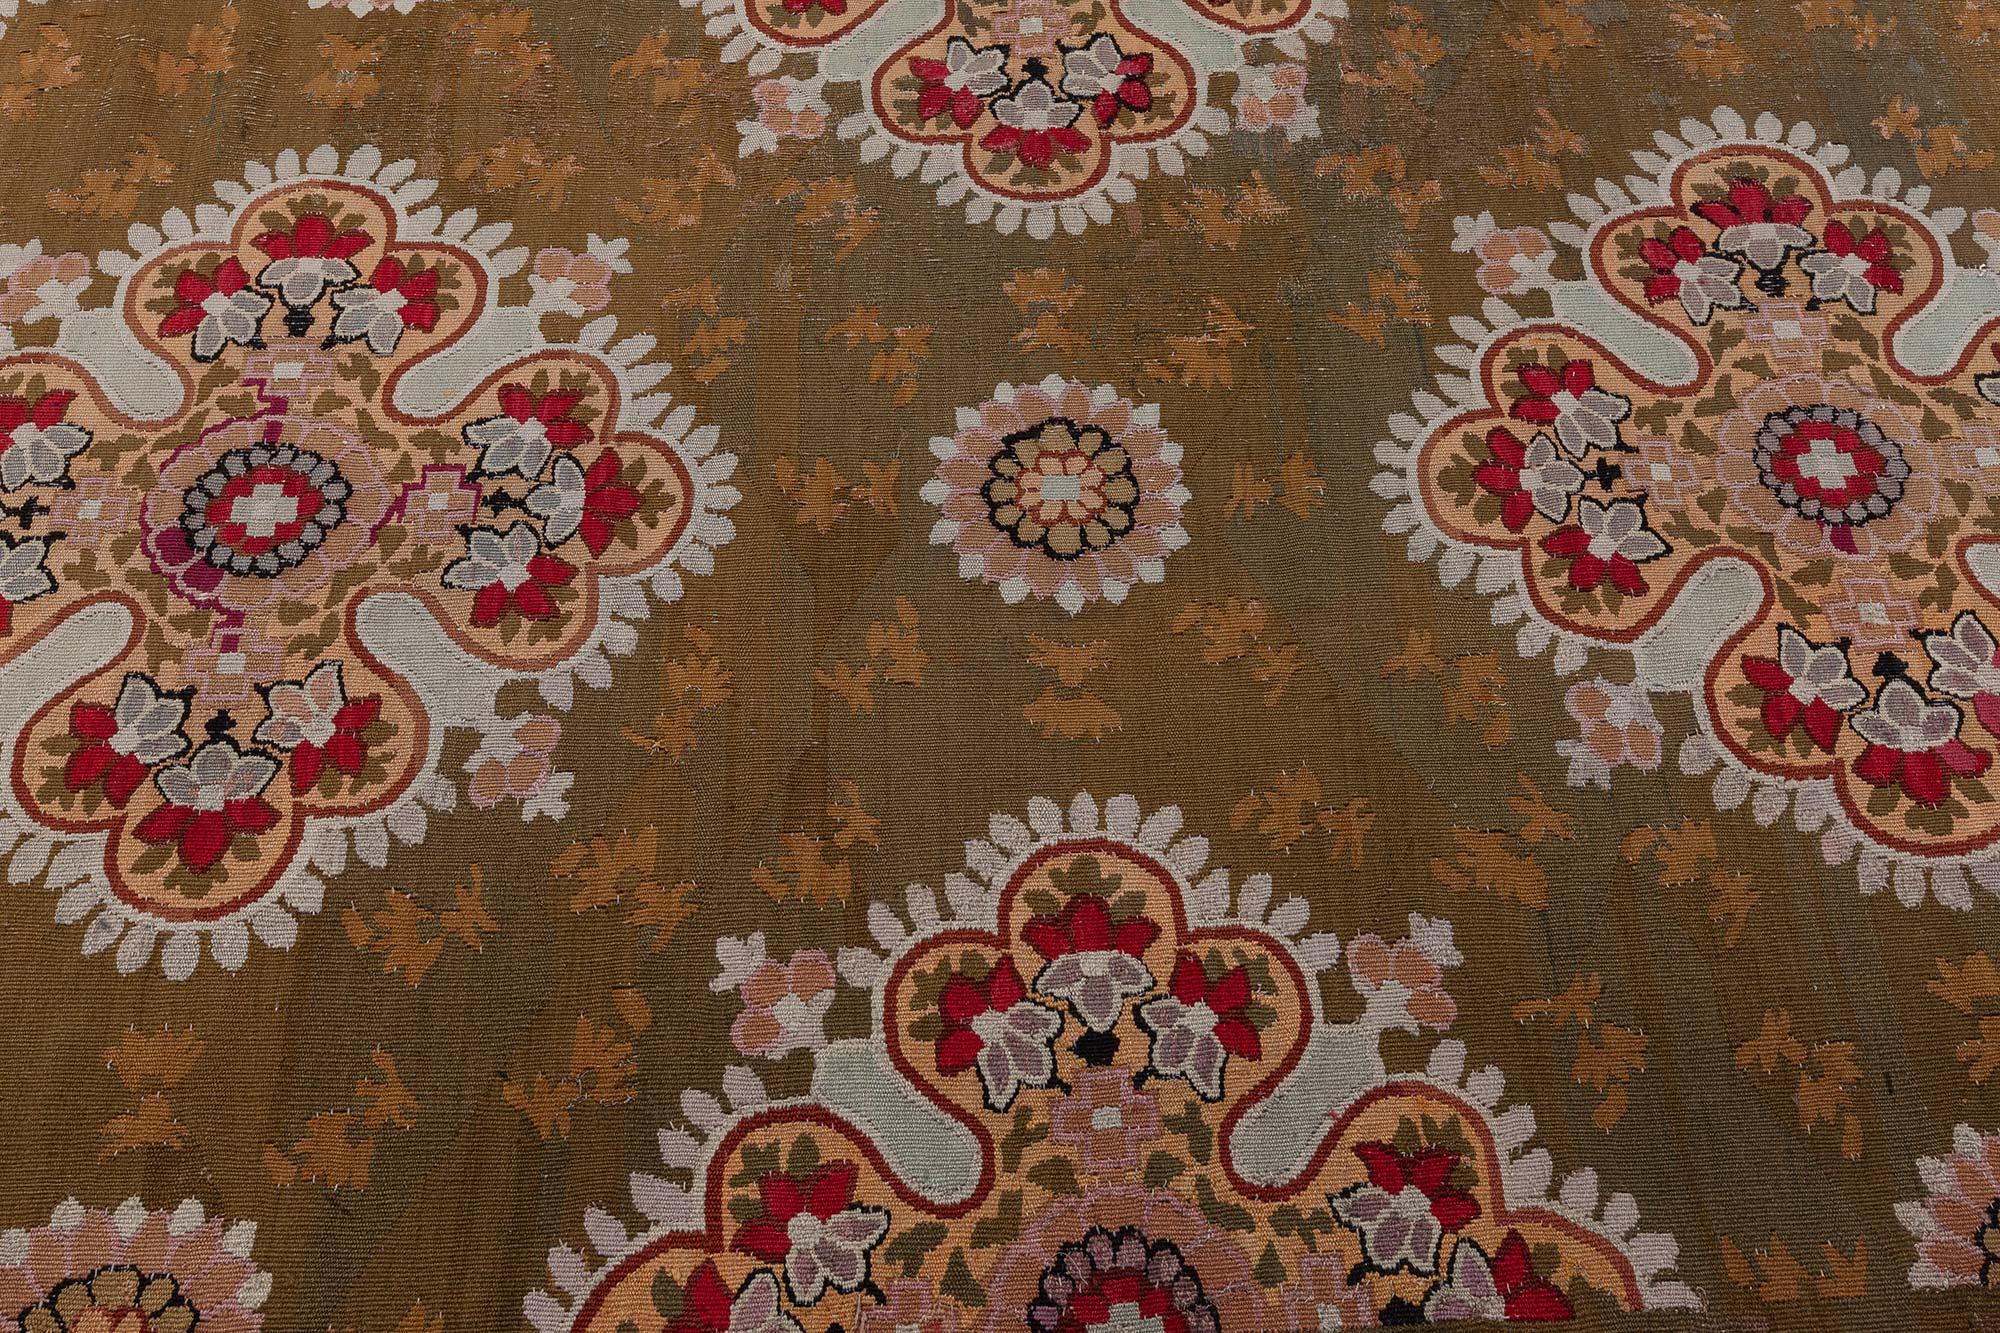 Antique French Aubusson Rug (Size Adjusted)
Size: 13'3